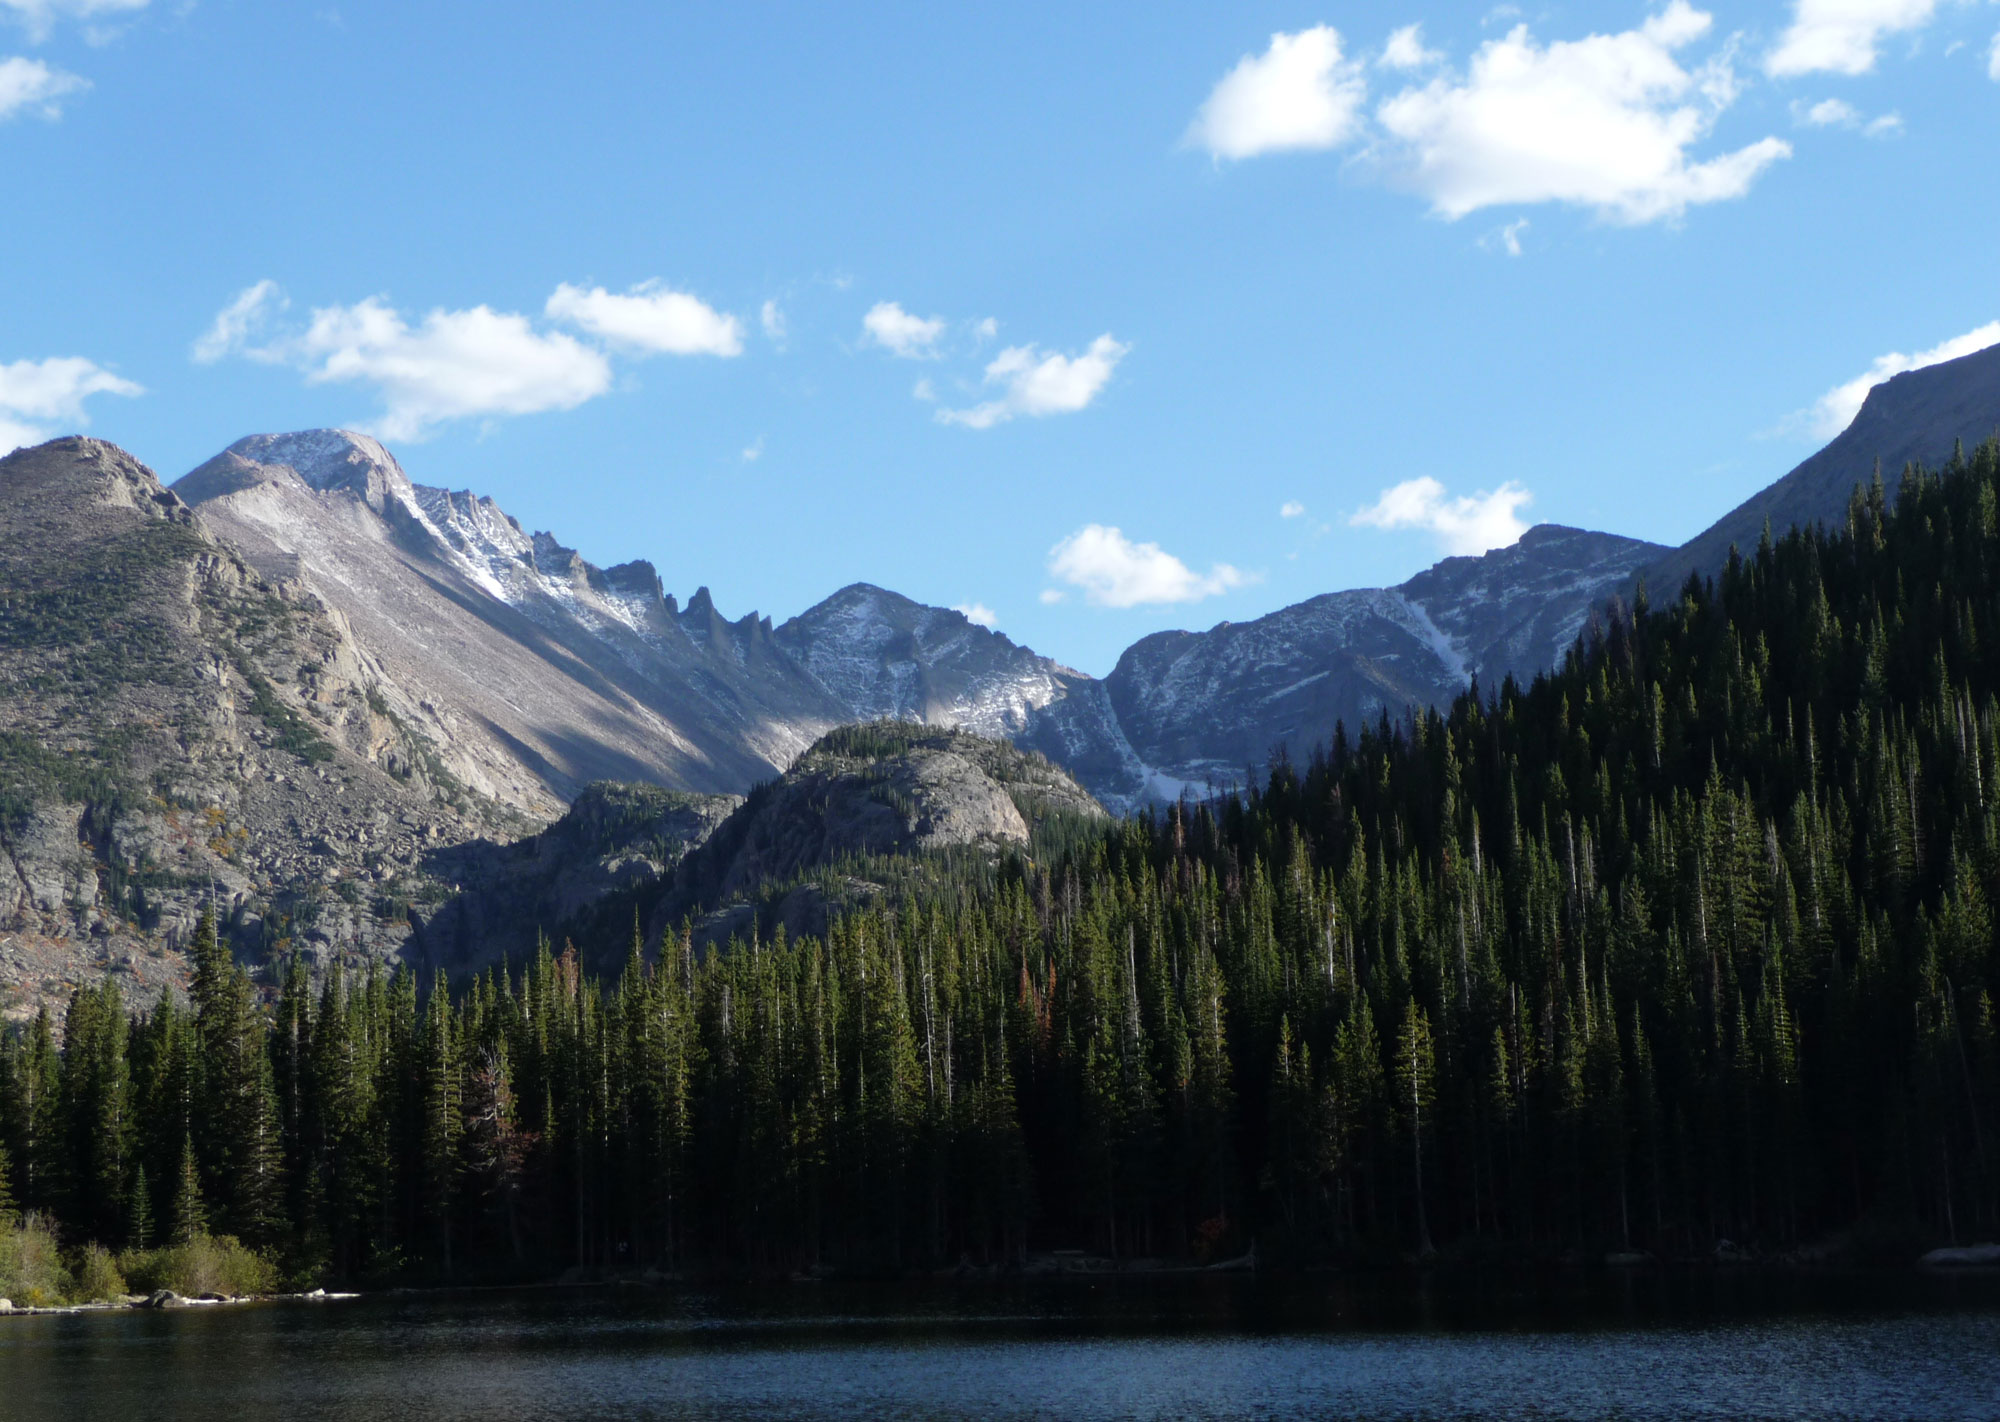 Photograph of a lake surrounded by mountain peaks in Rocky Mountain National Park, Colorado. The nearest slope is covered with conifers. More distant peaks have no vegetation and a light dusting of snow. In the foreground is the surface of a lake.